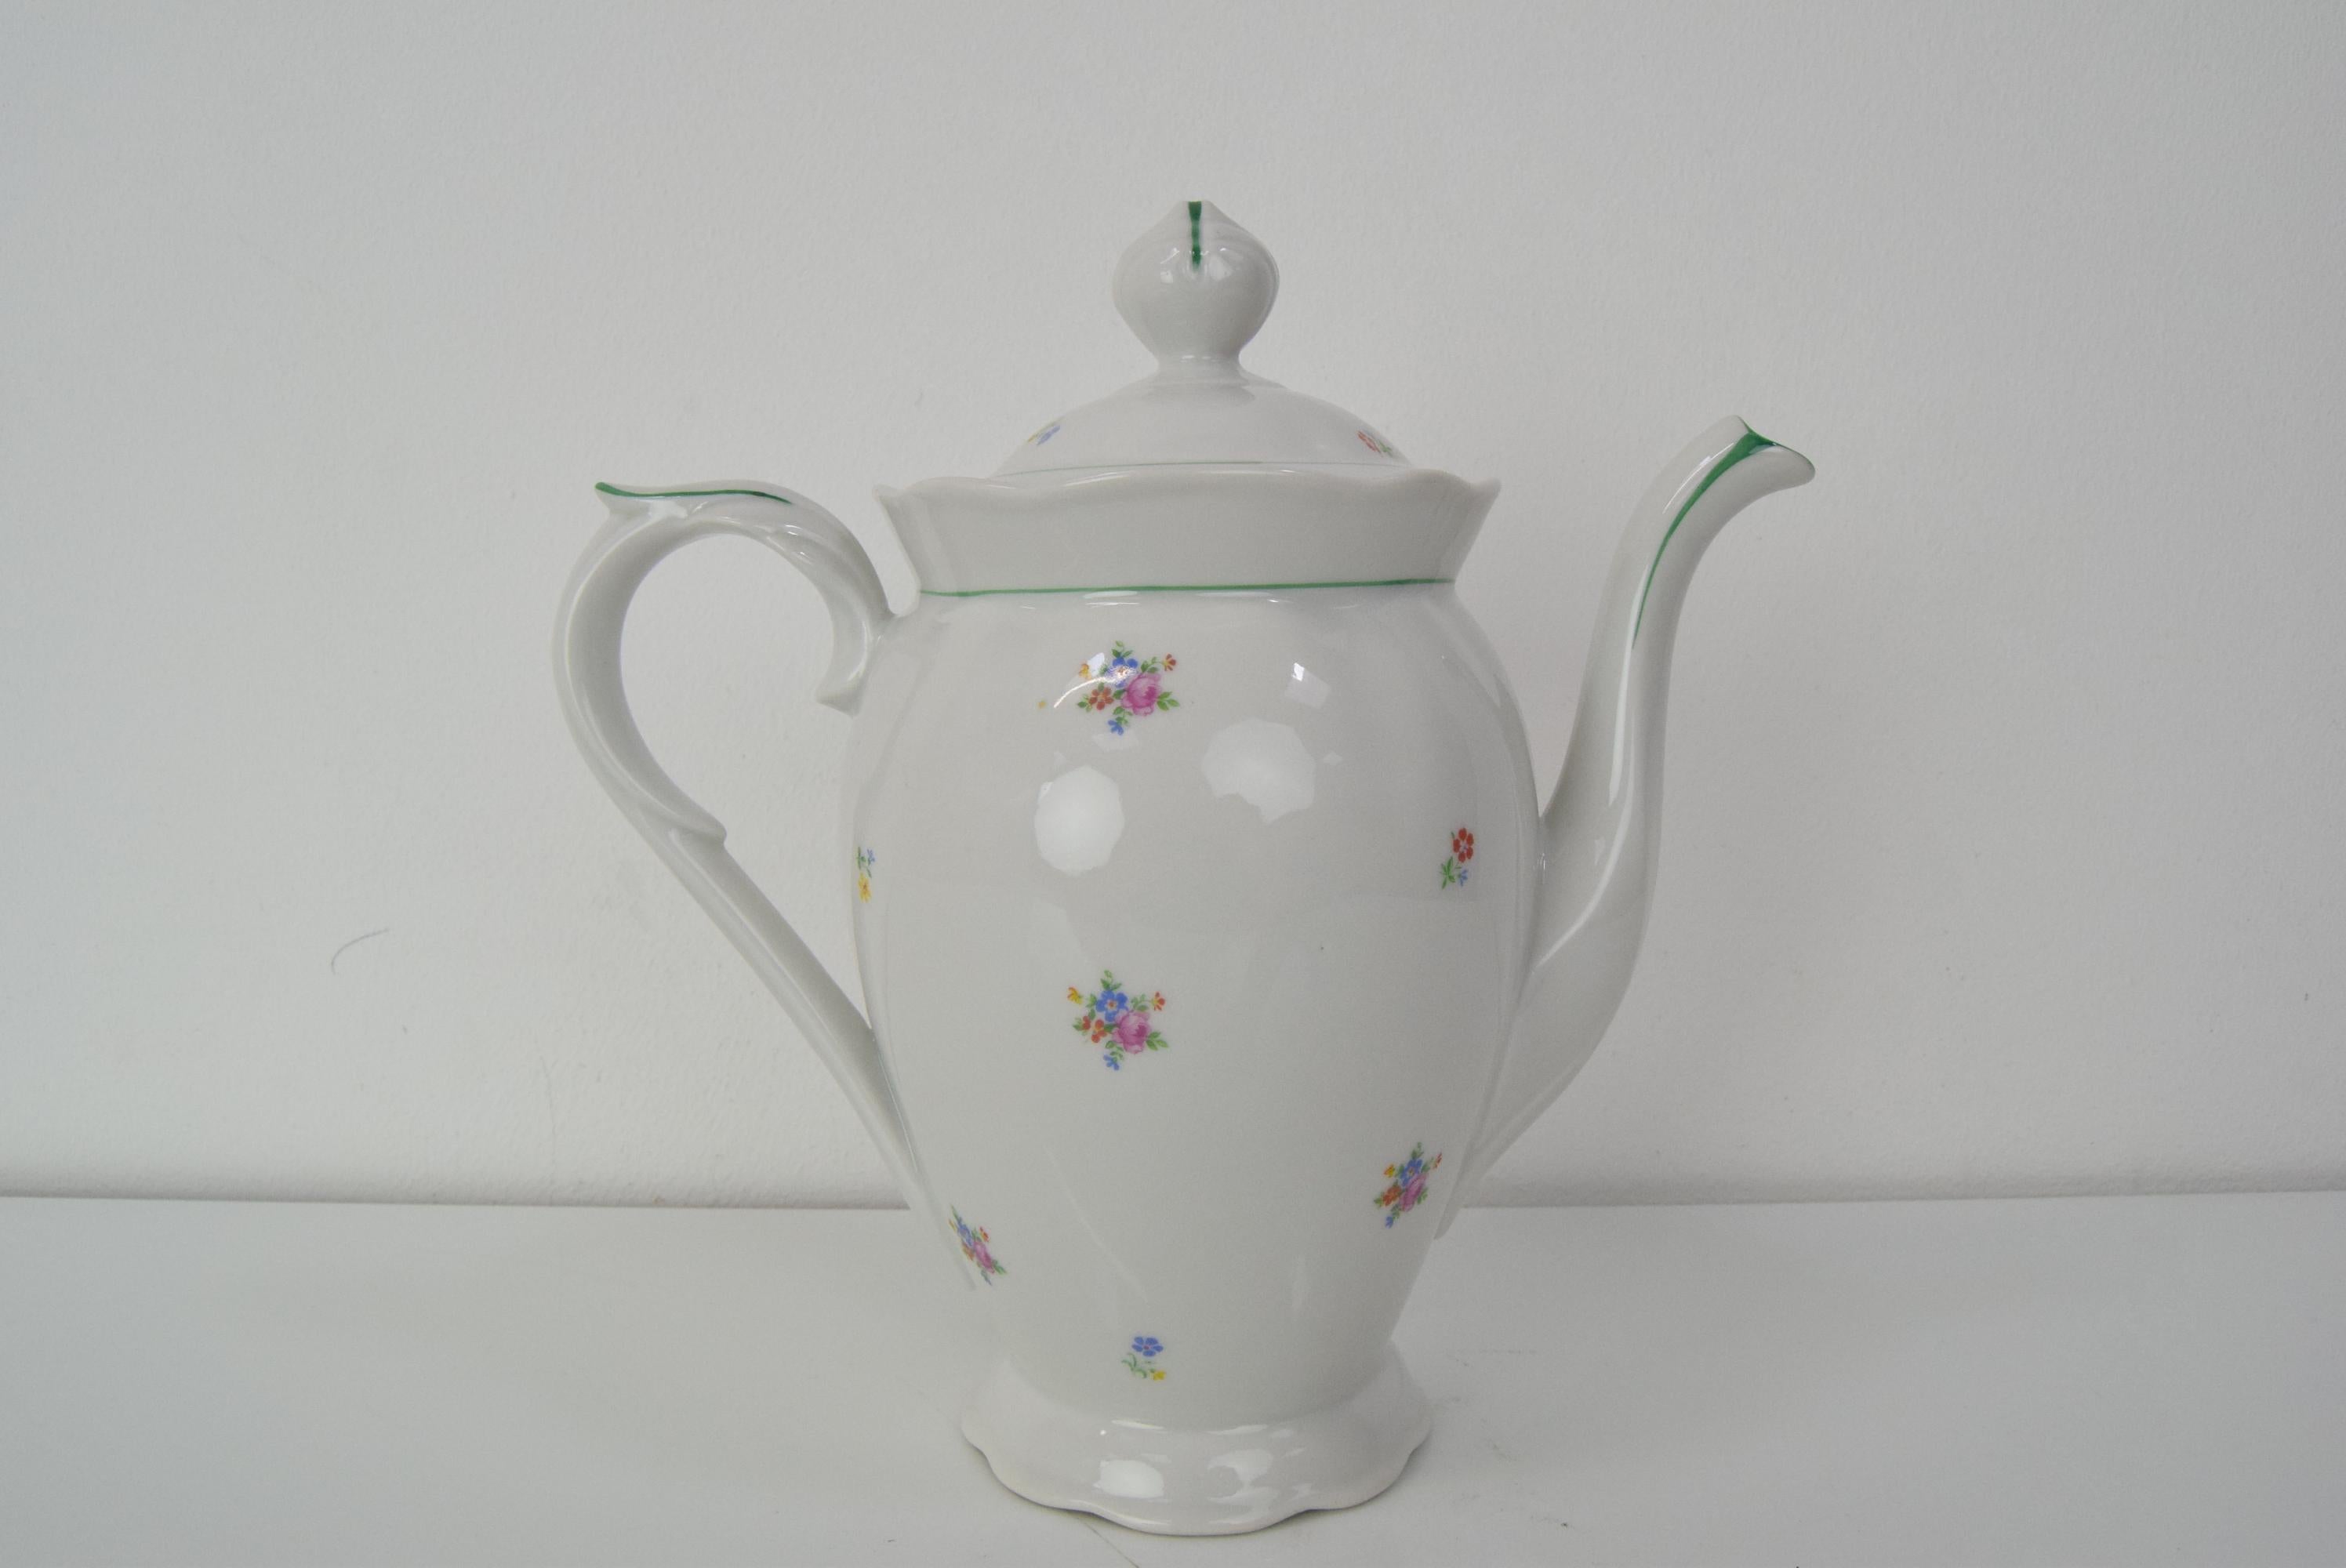 Made in Czechoslovakia
Made of Porcelain
Re-polished
Good original condition.